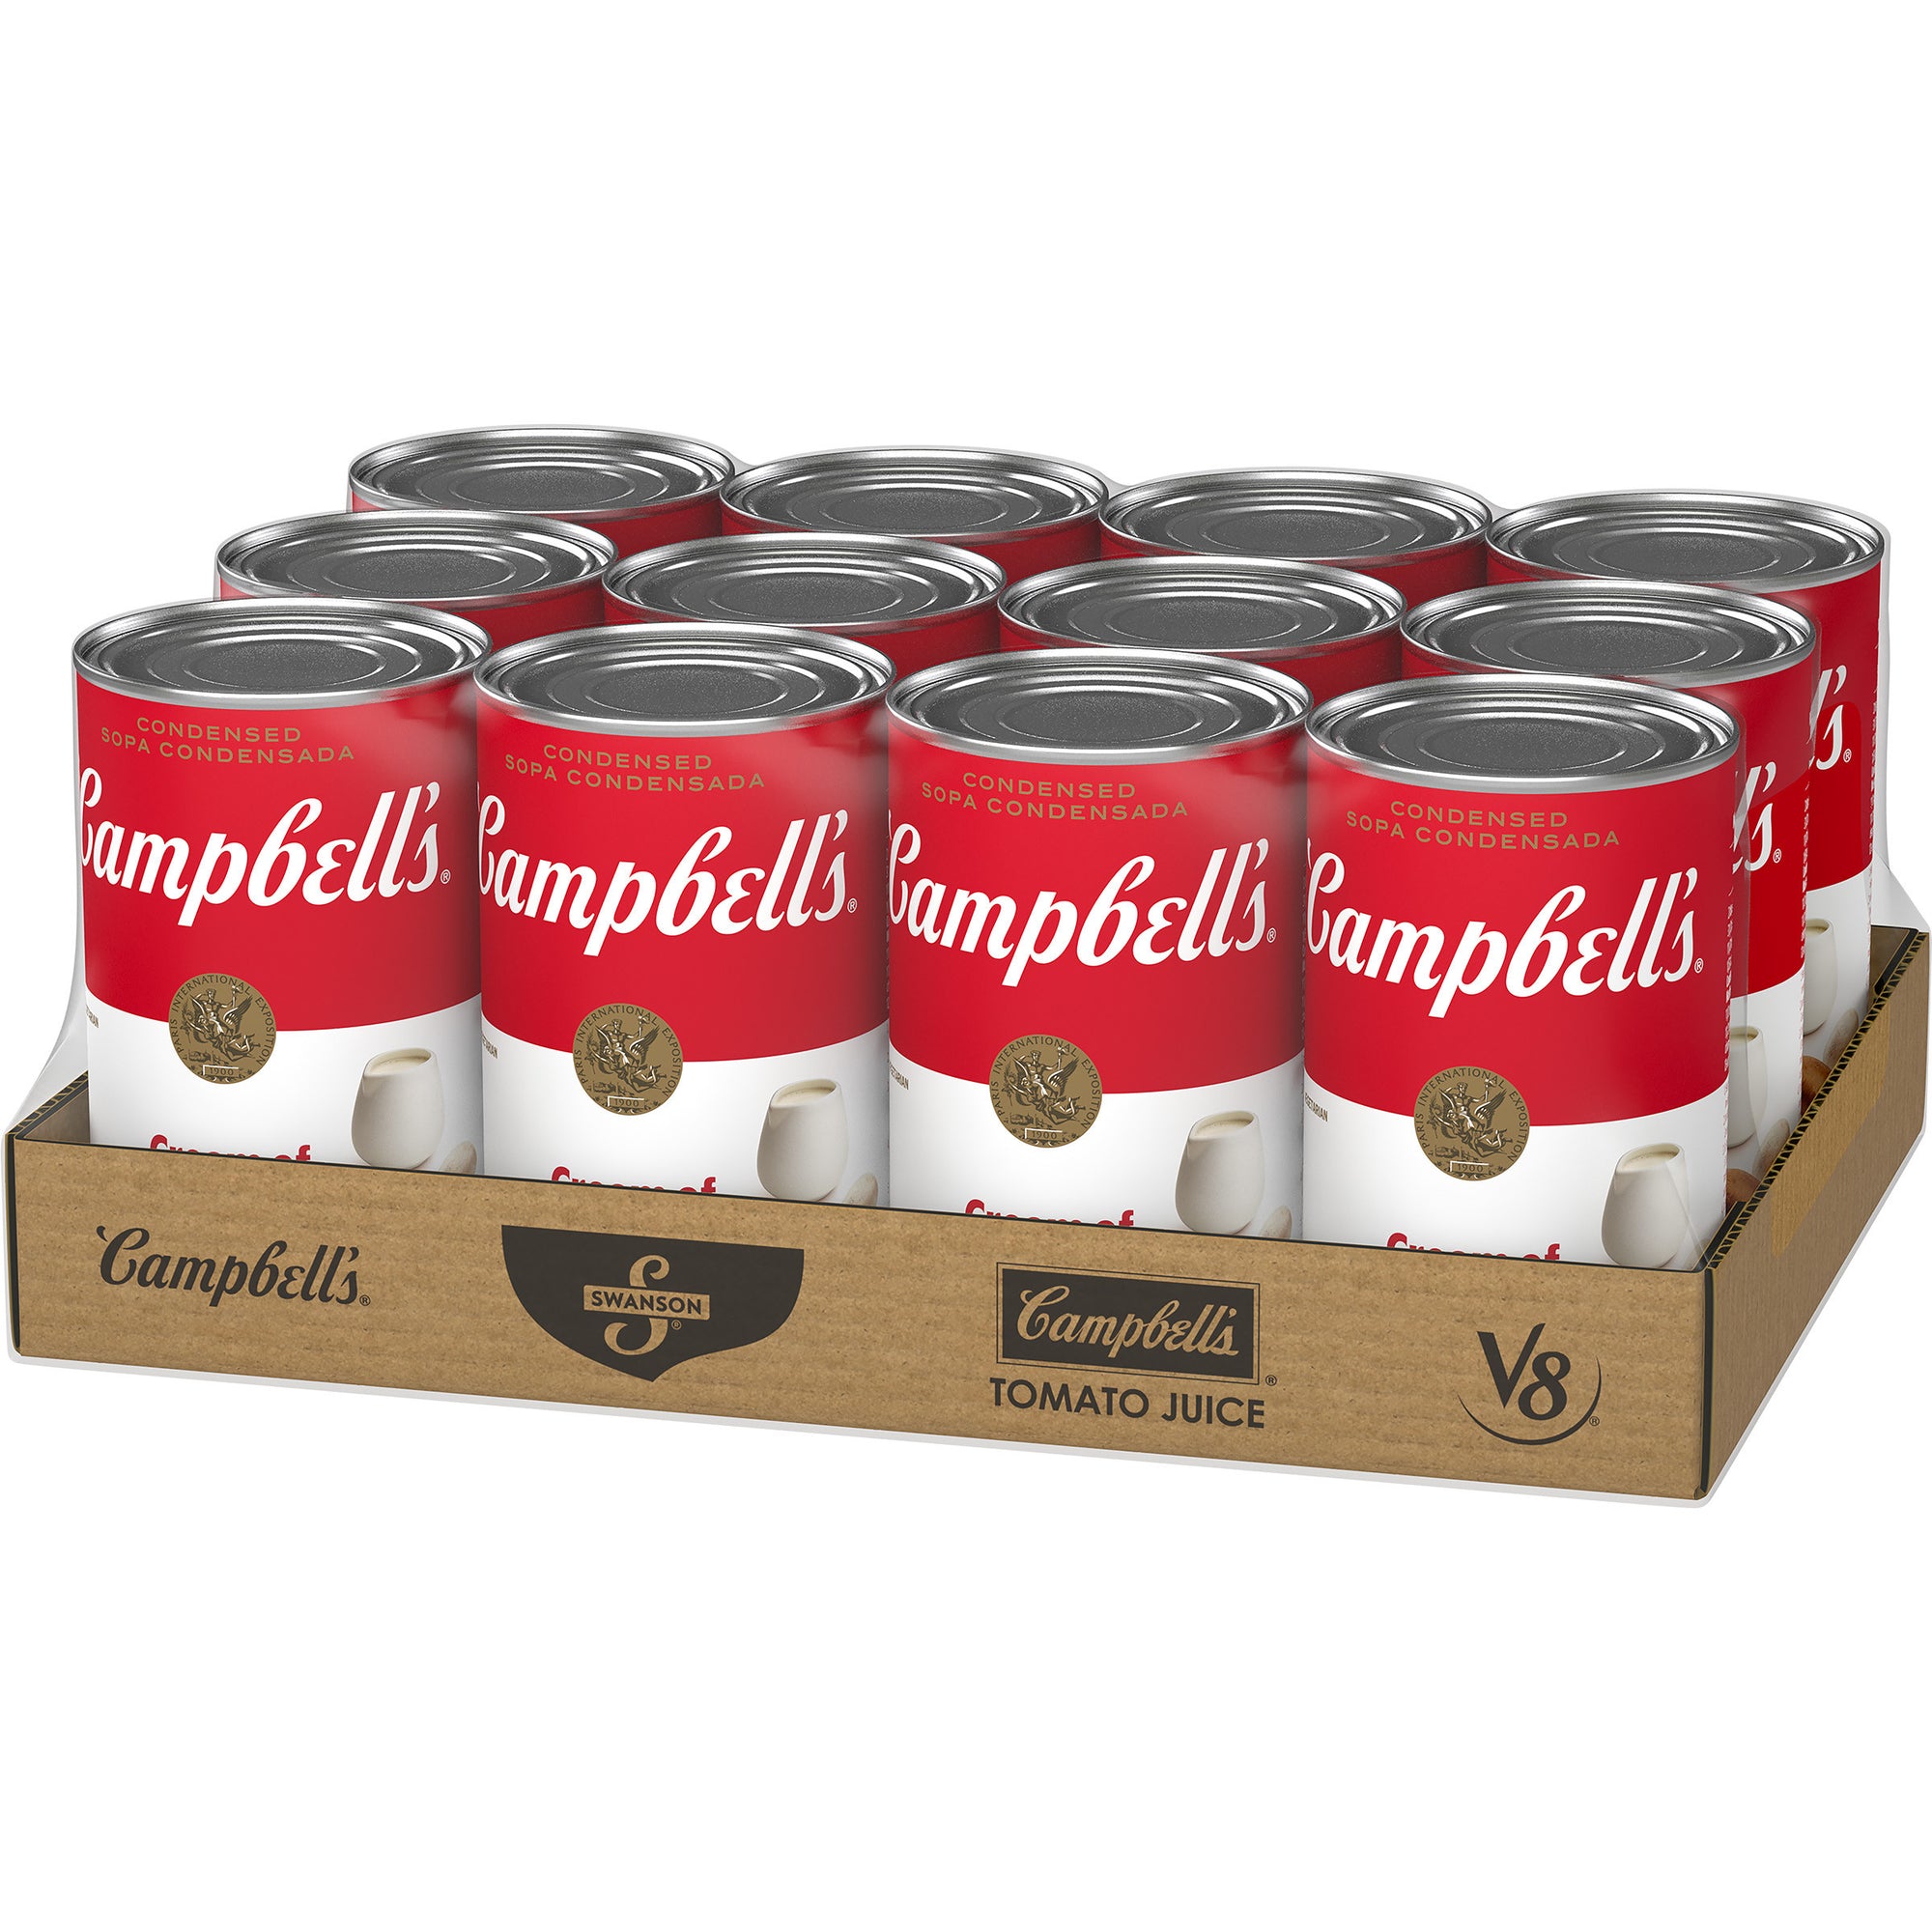 CAMPBELL'S CLASSIC CREAM OF MUSHROOM CONDENSED SHELF STABLE SOUP, 12 - 50 OZ